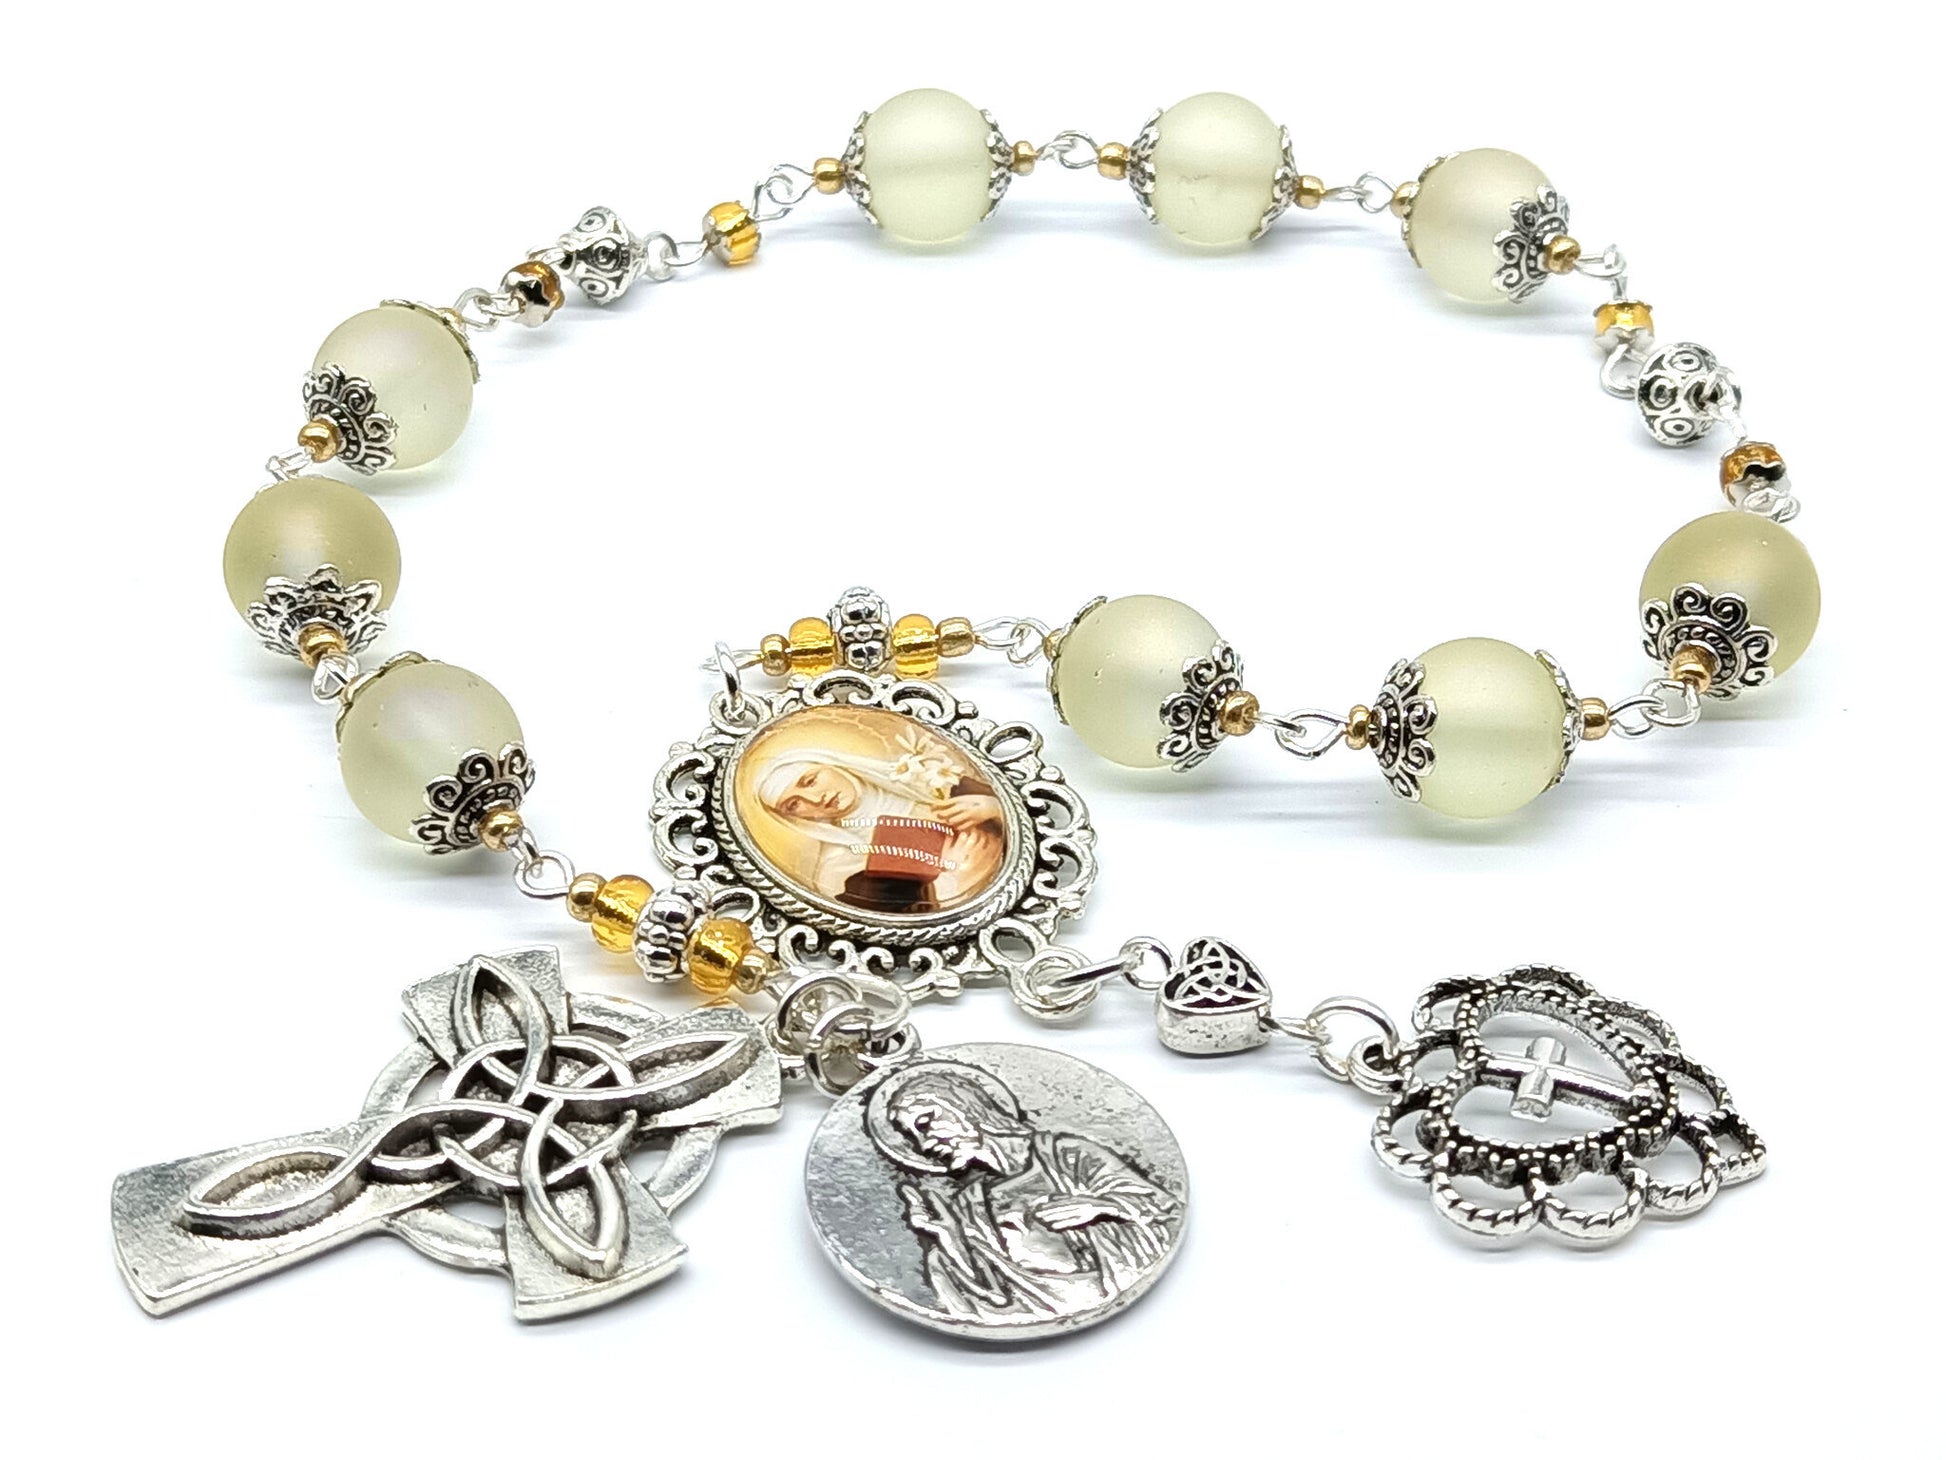 Saint Catherine of Siena unique rosary beads prayer chaplet with frosted glass beads, silver Celtic cross, picture centre medal and silver bead caps and accessories.